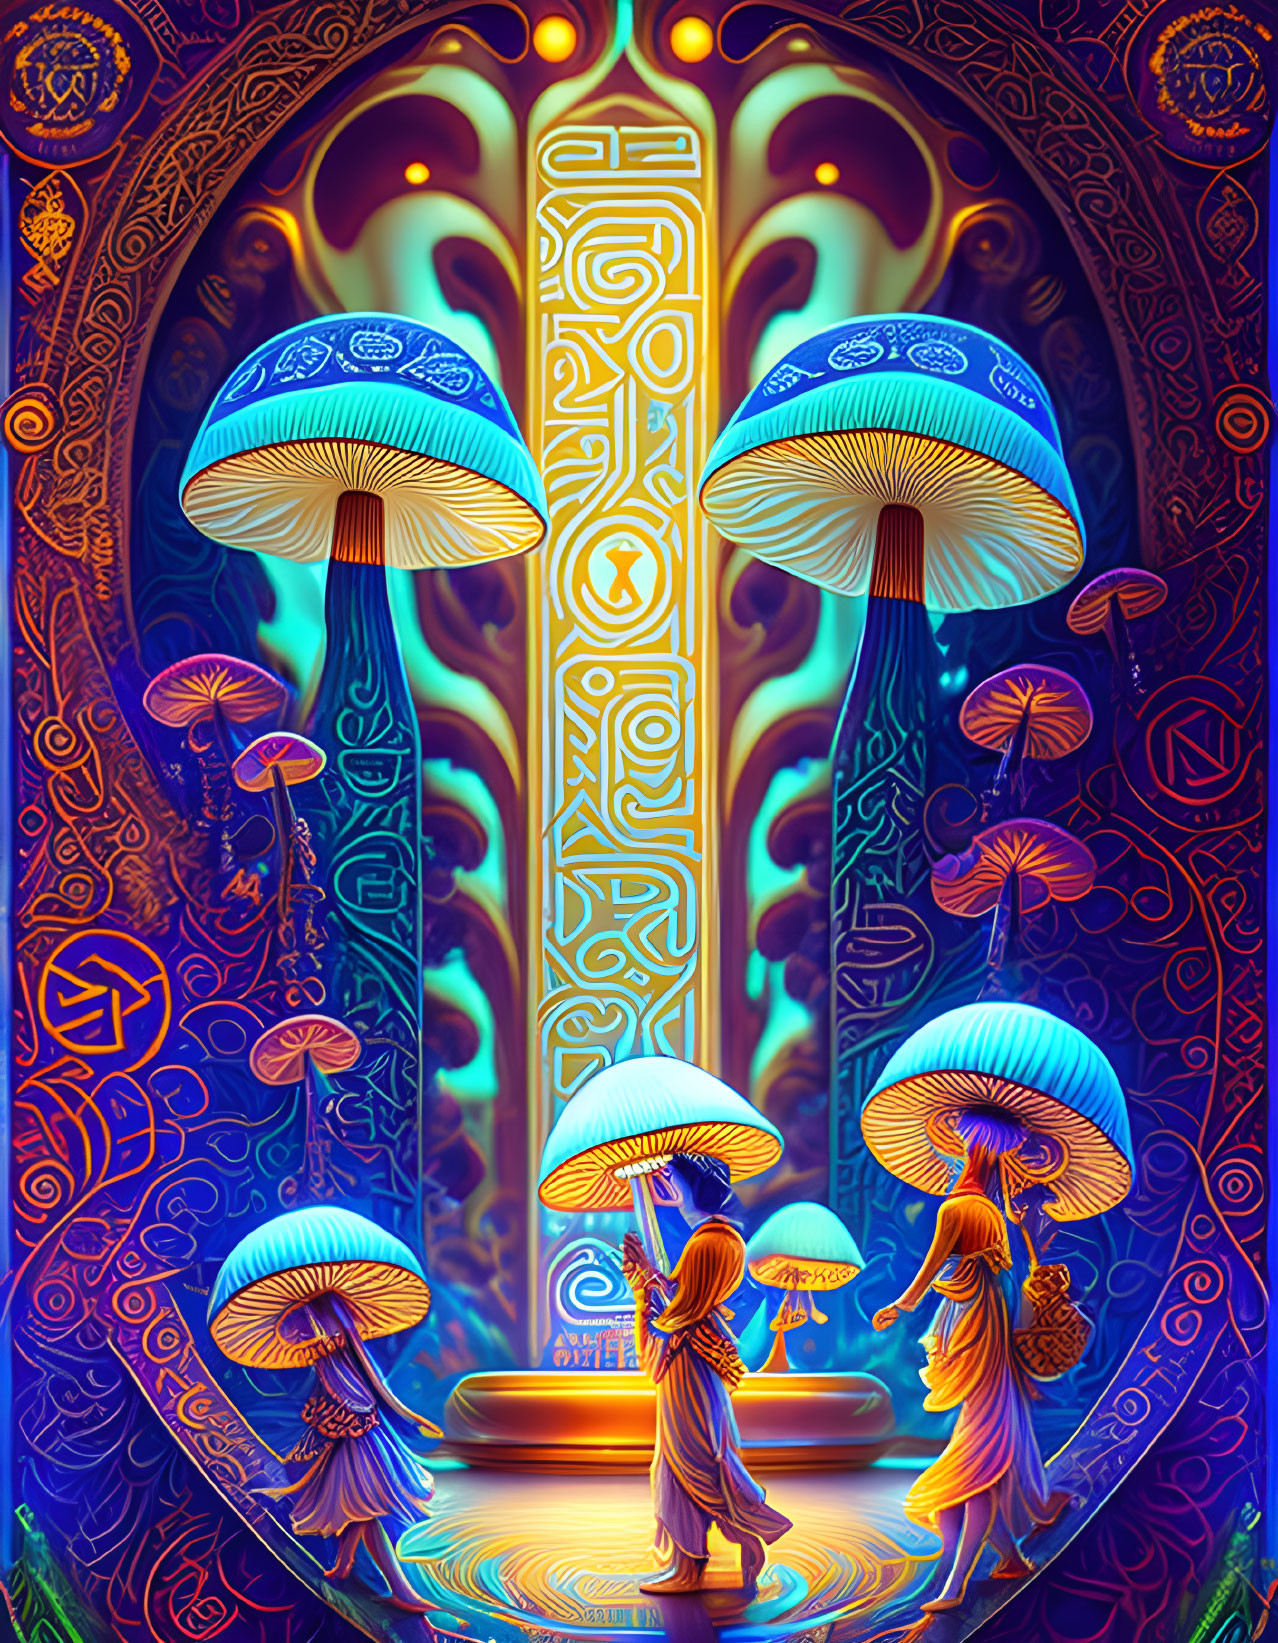 Mushroom Temple of the Dimensional Wizards